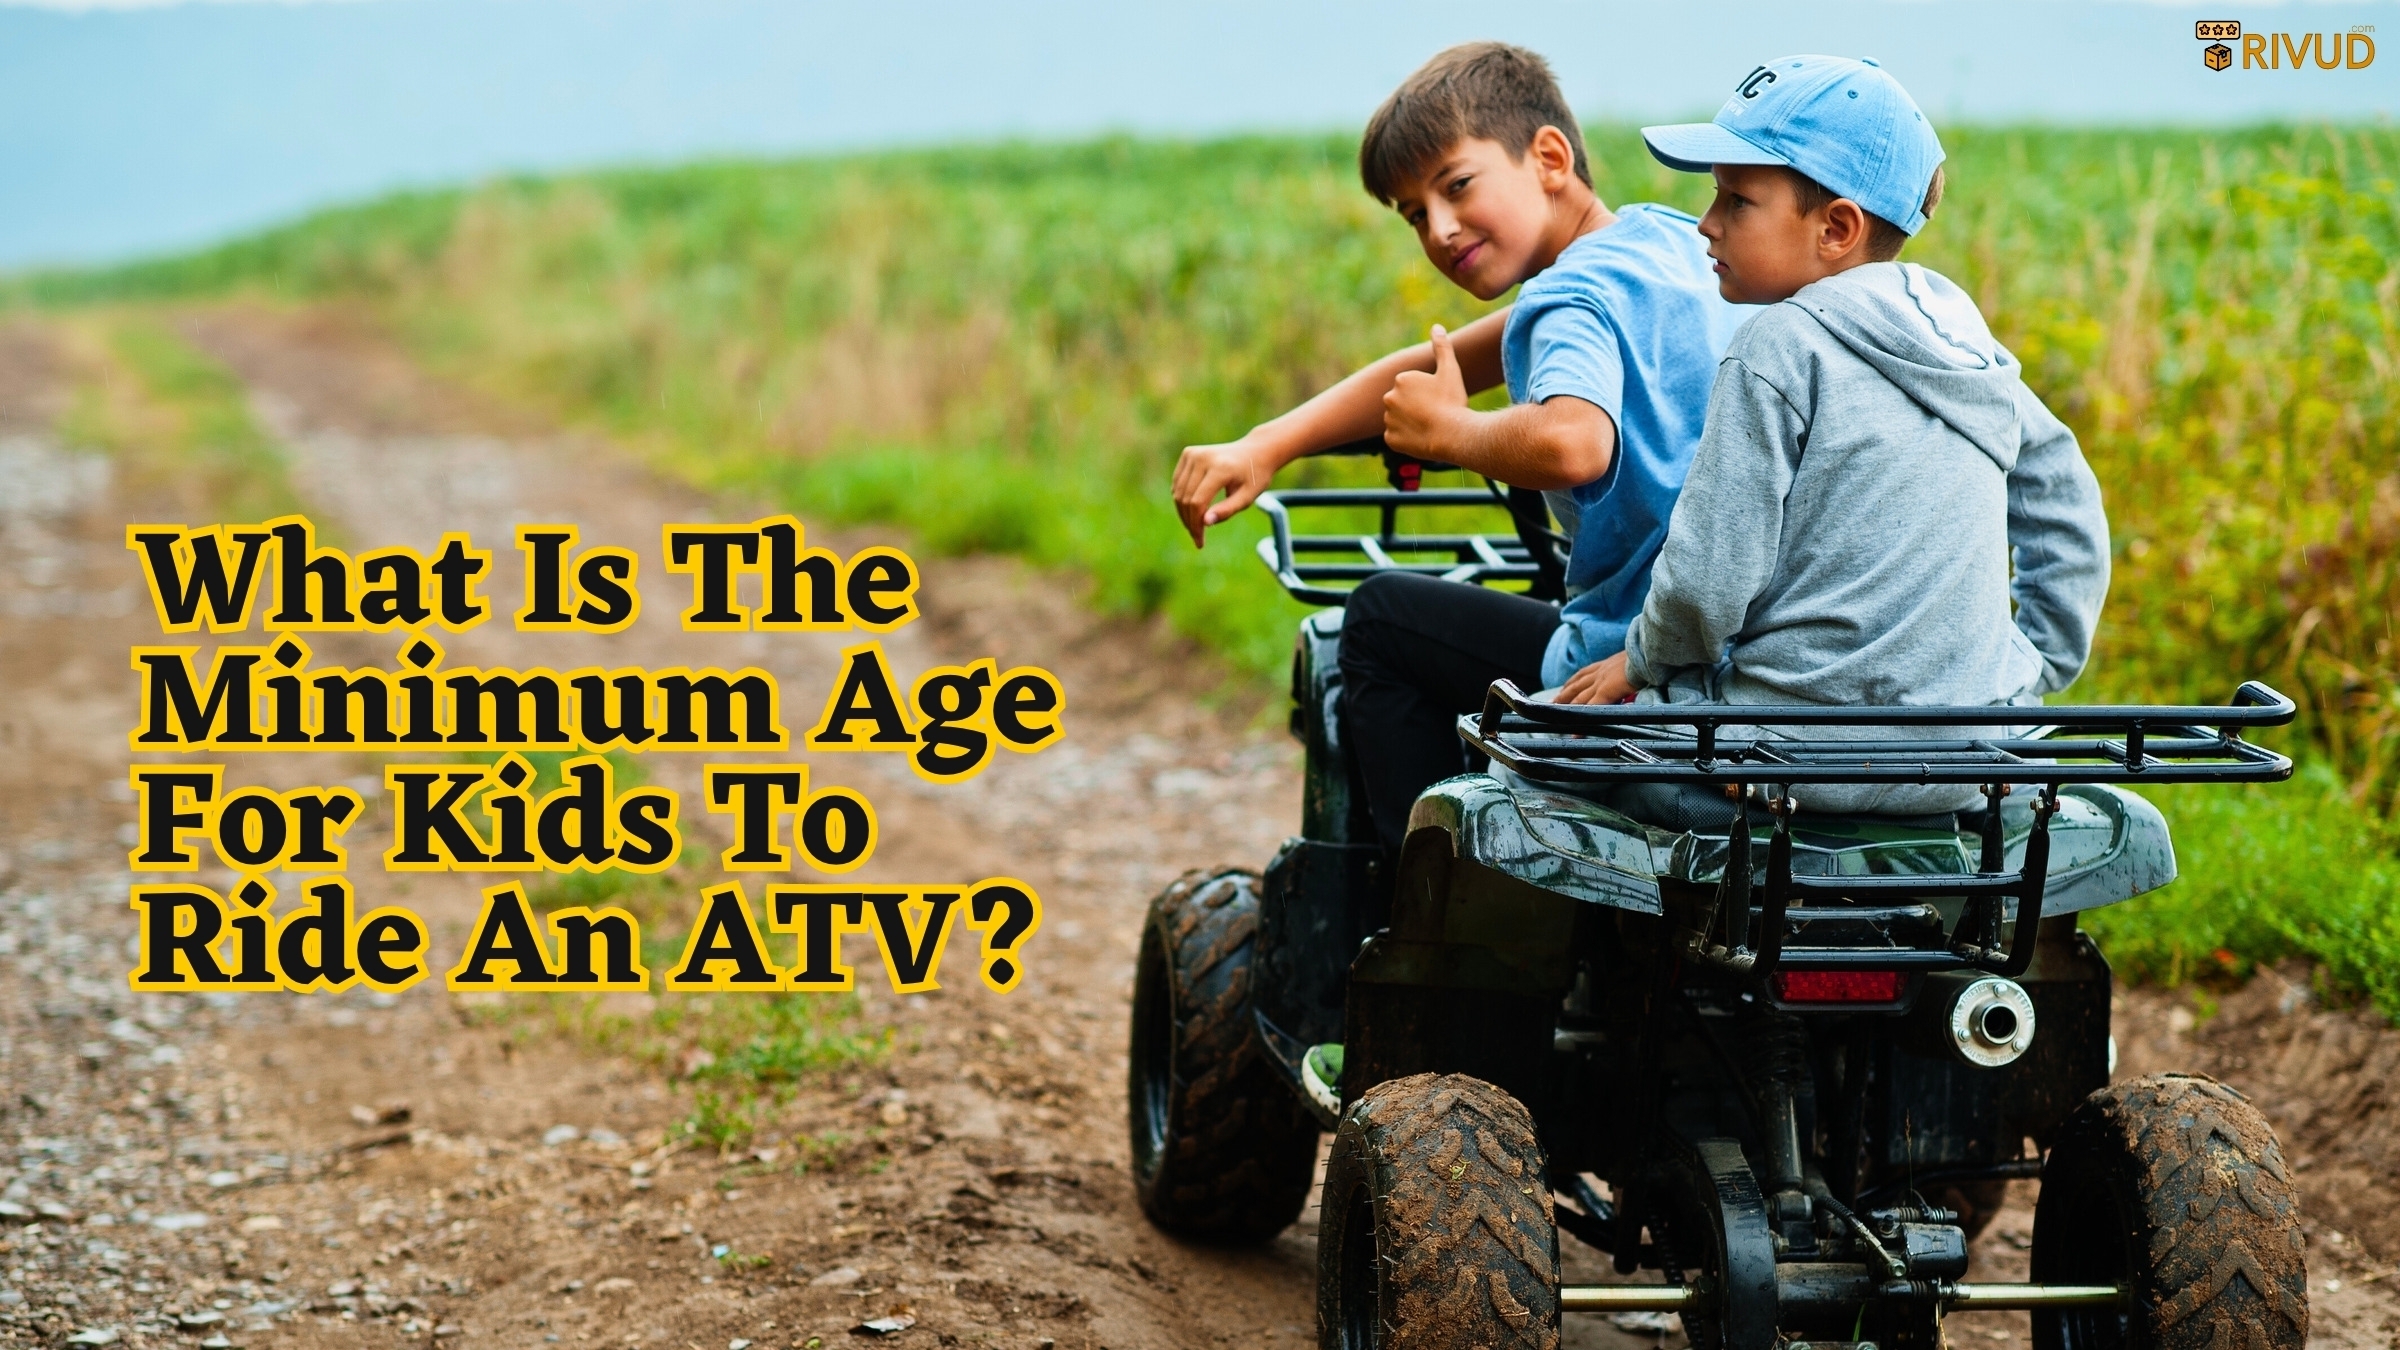 What Is The Minimum Age For Kids To Ride An Atv?